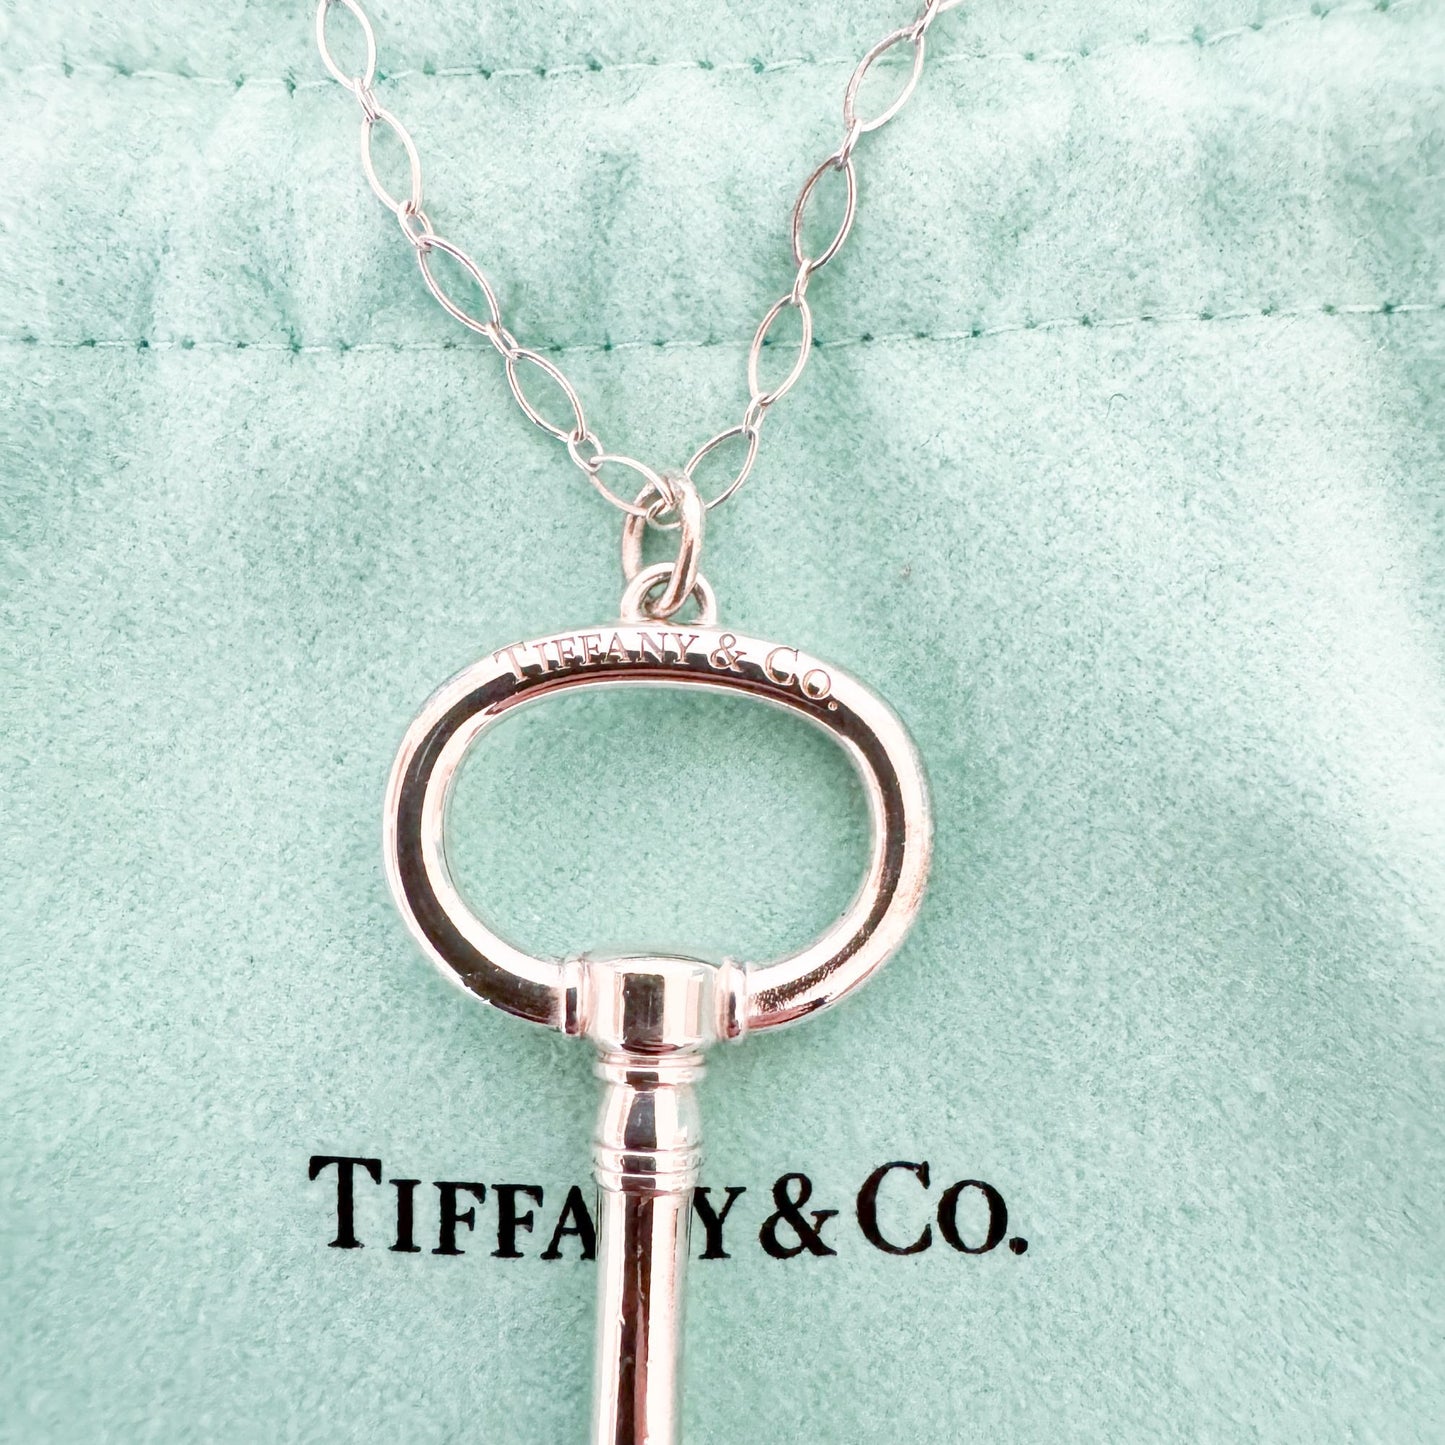 Tiffany & Co. Large Oval Key Pendant Necklace in Sterling Silver